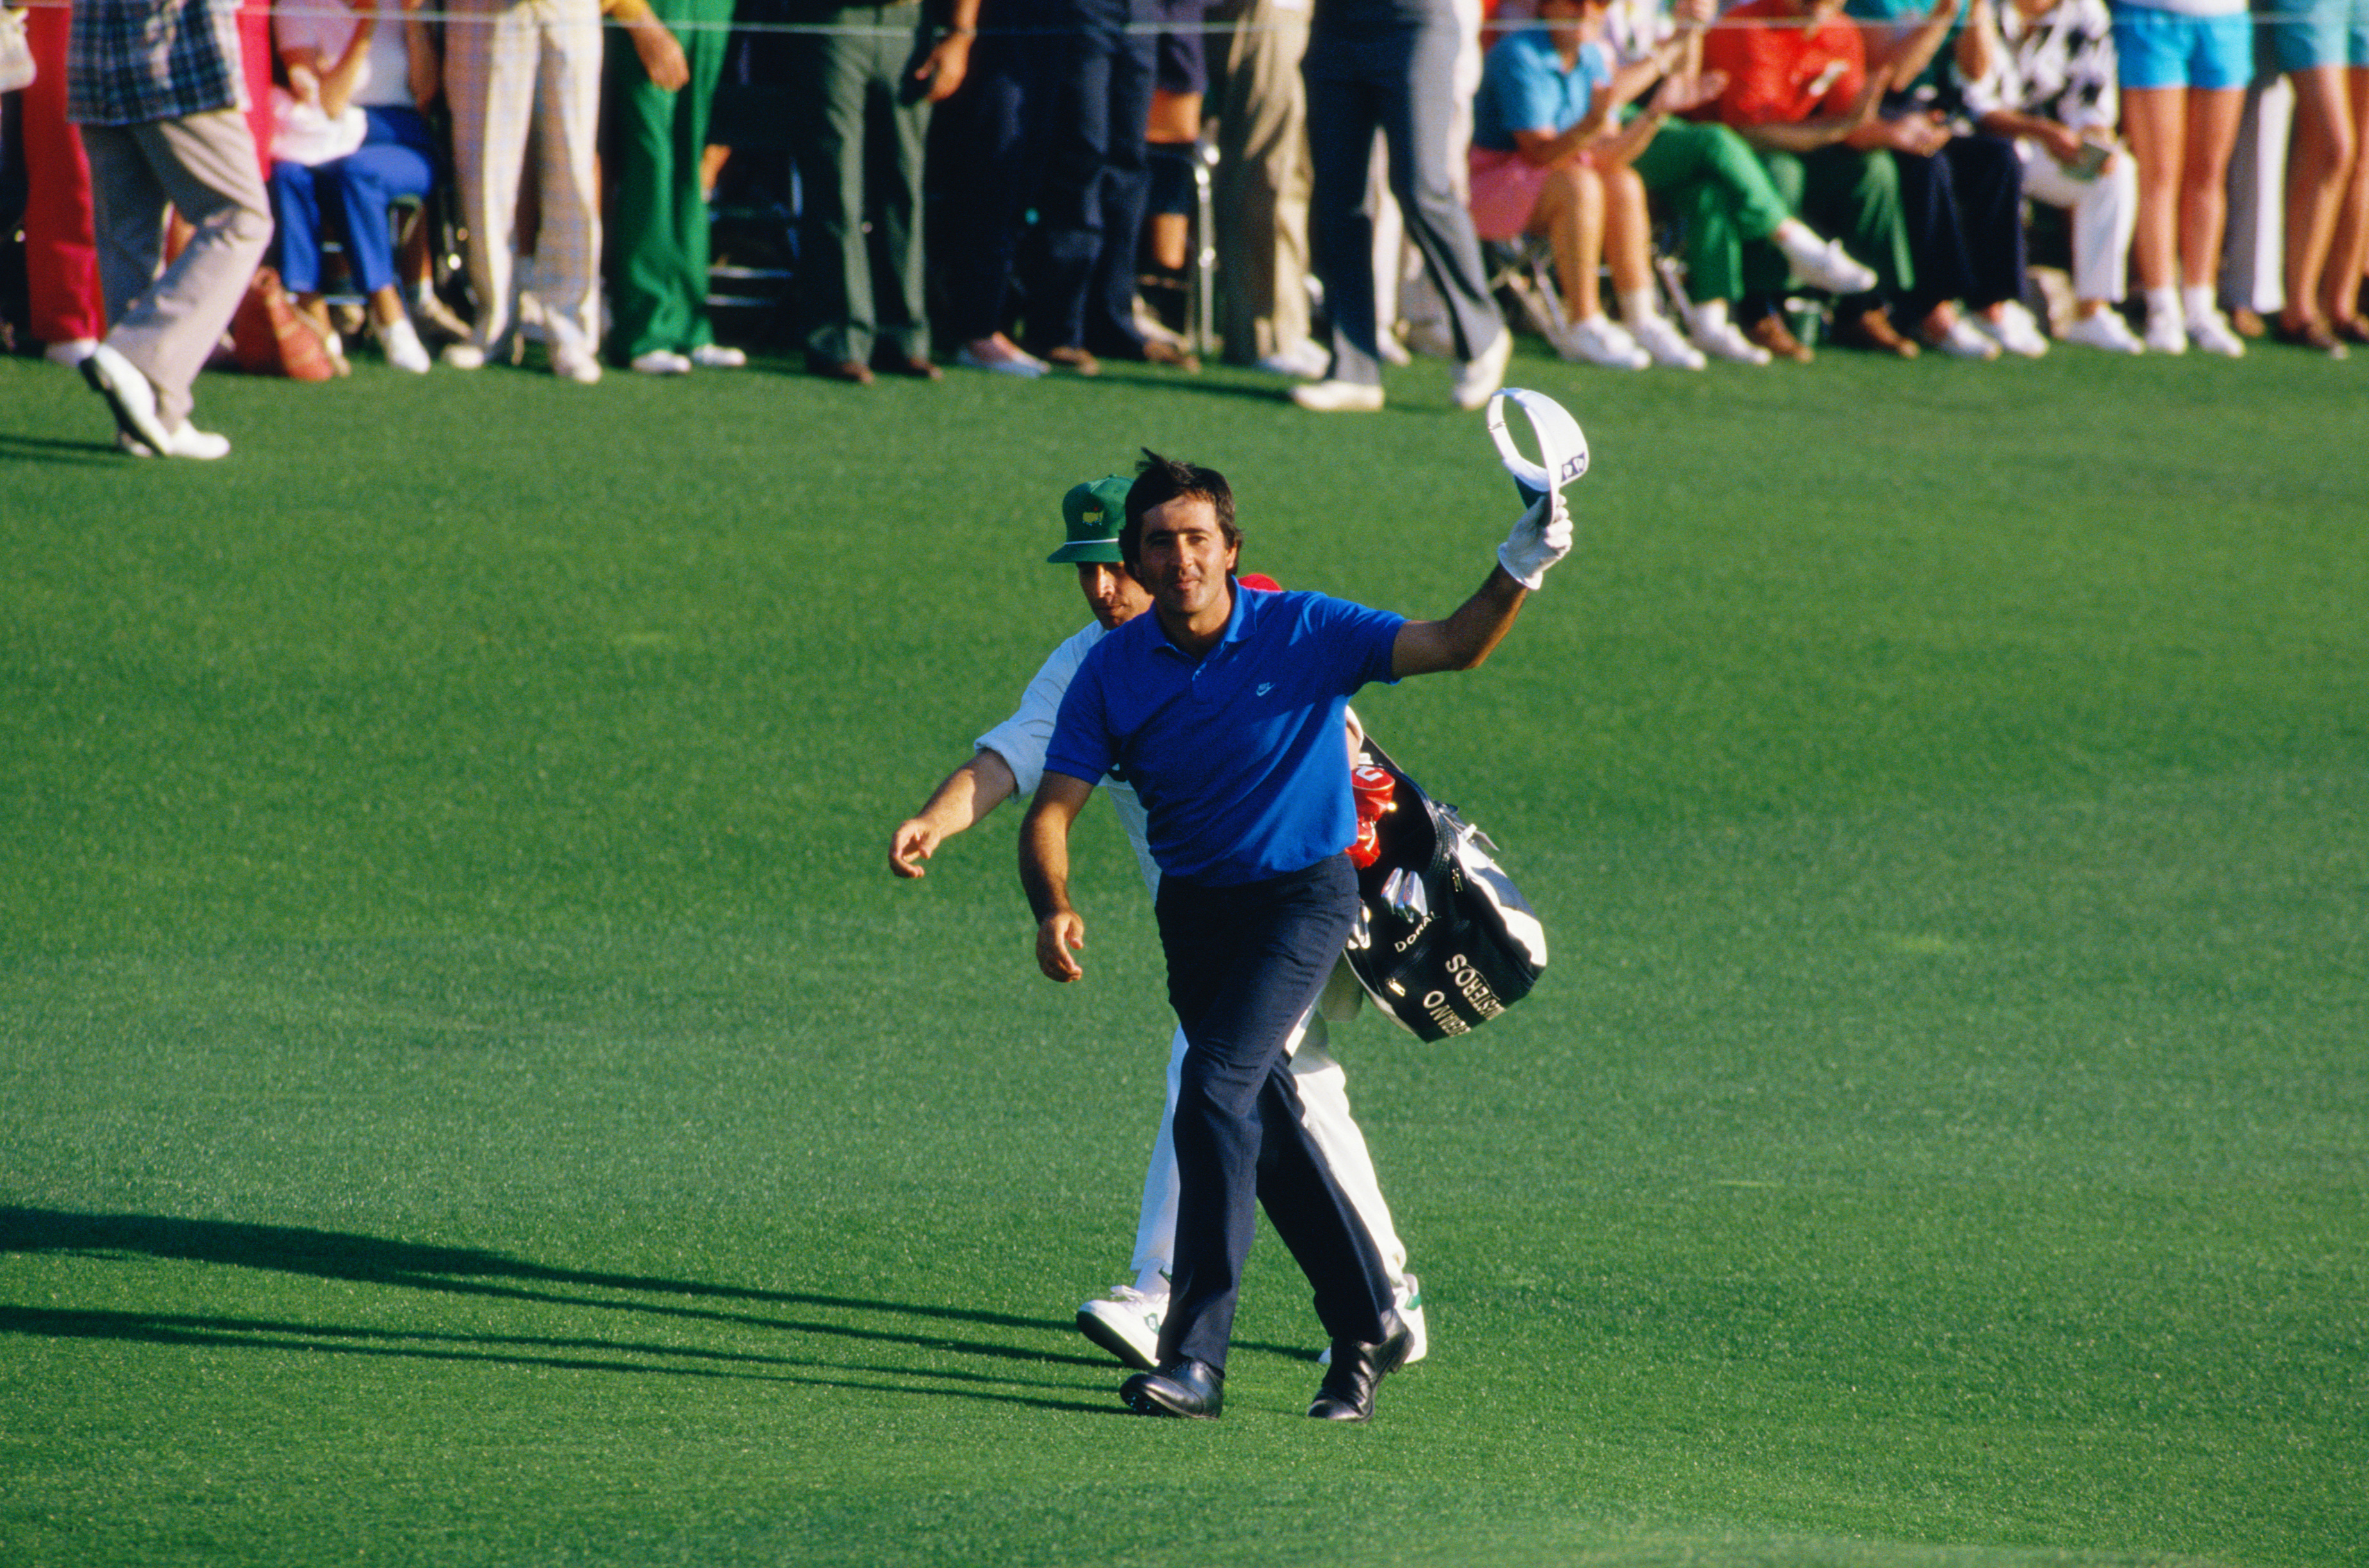 Celebrating Seve Ballesteros: 10 Shots That Cemented His Legacy in